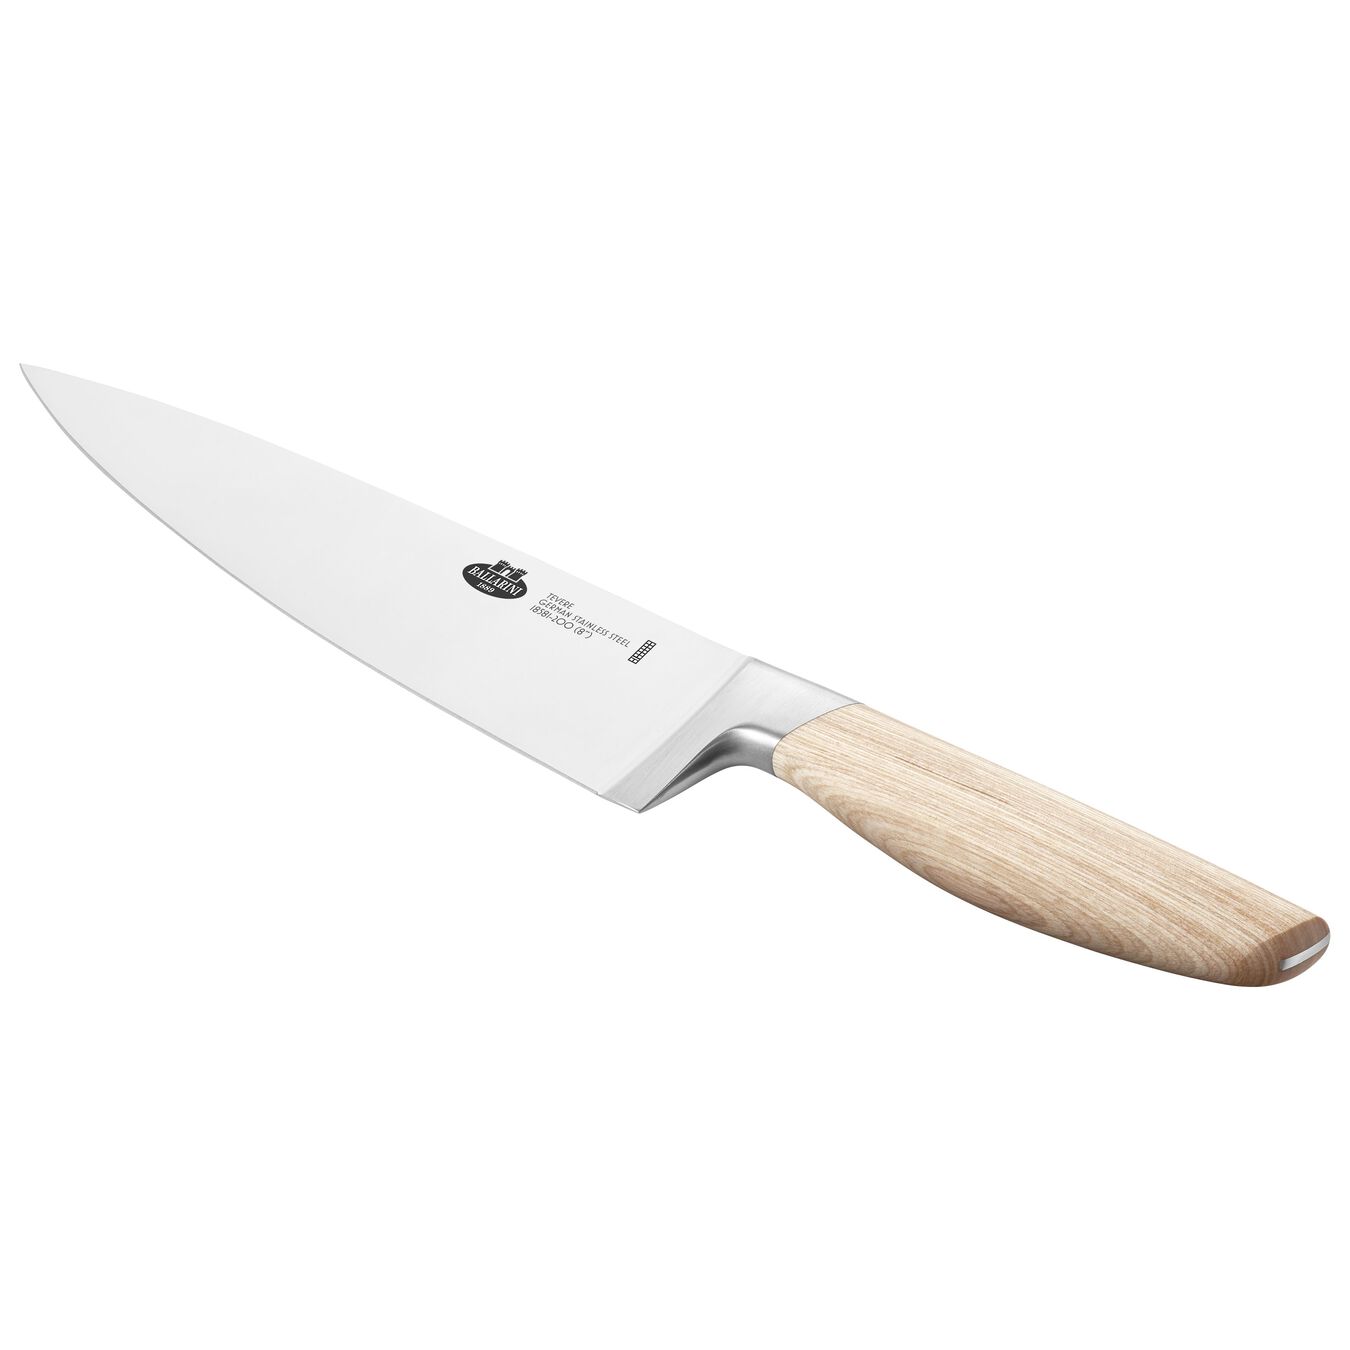 20 cm Chef's knife,,large 6